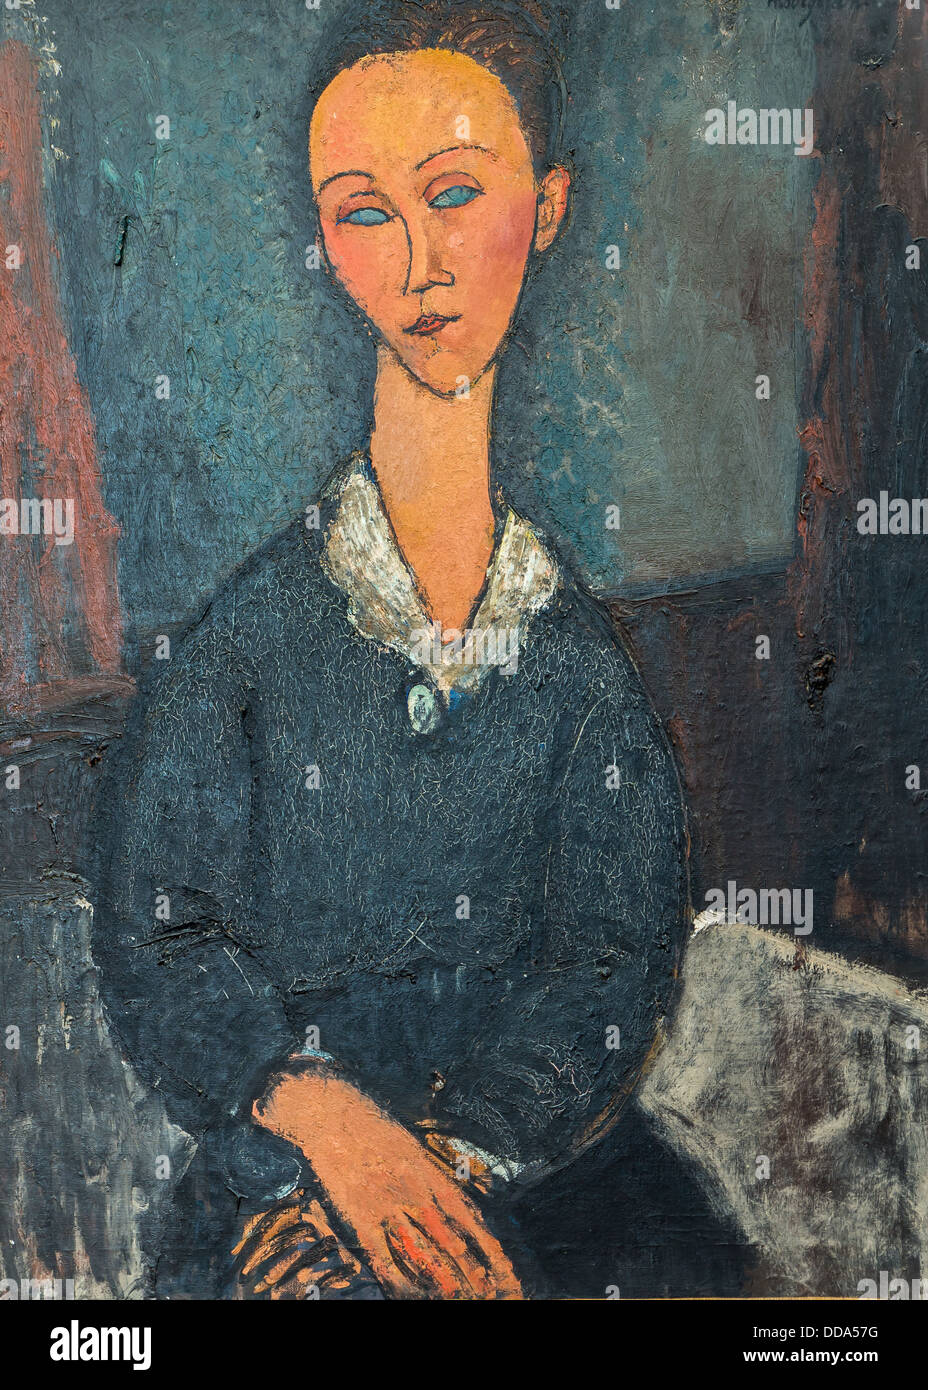 20th century  -  Woman with White Collar, 1917 - Amedeo Modigliani Philippe Sauvan-Magnet / Active Museum Oil on canvas Stock Photo